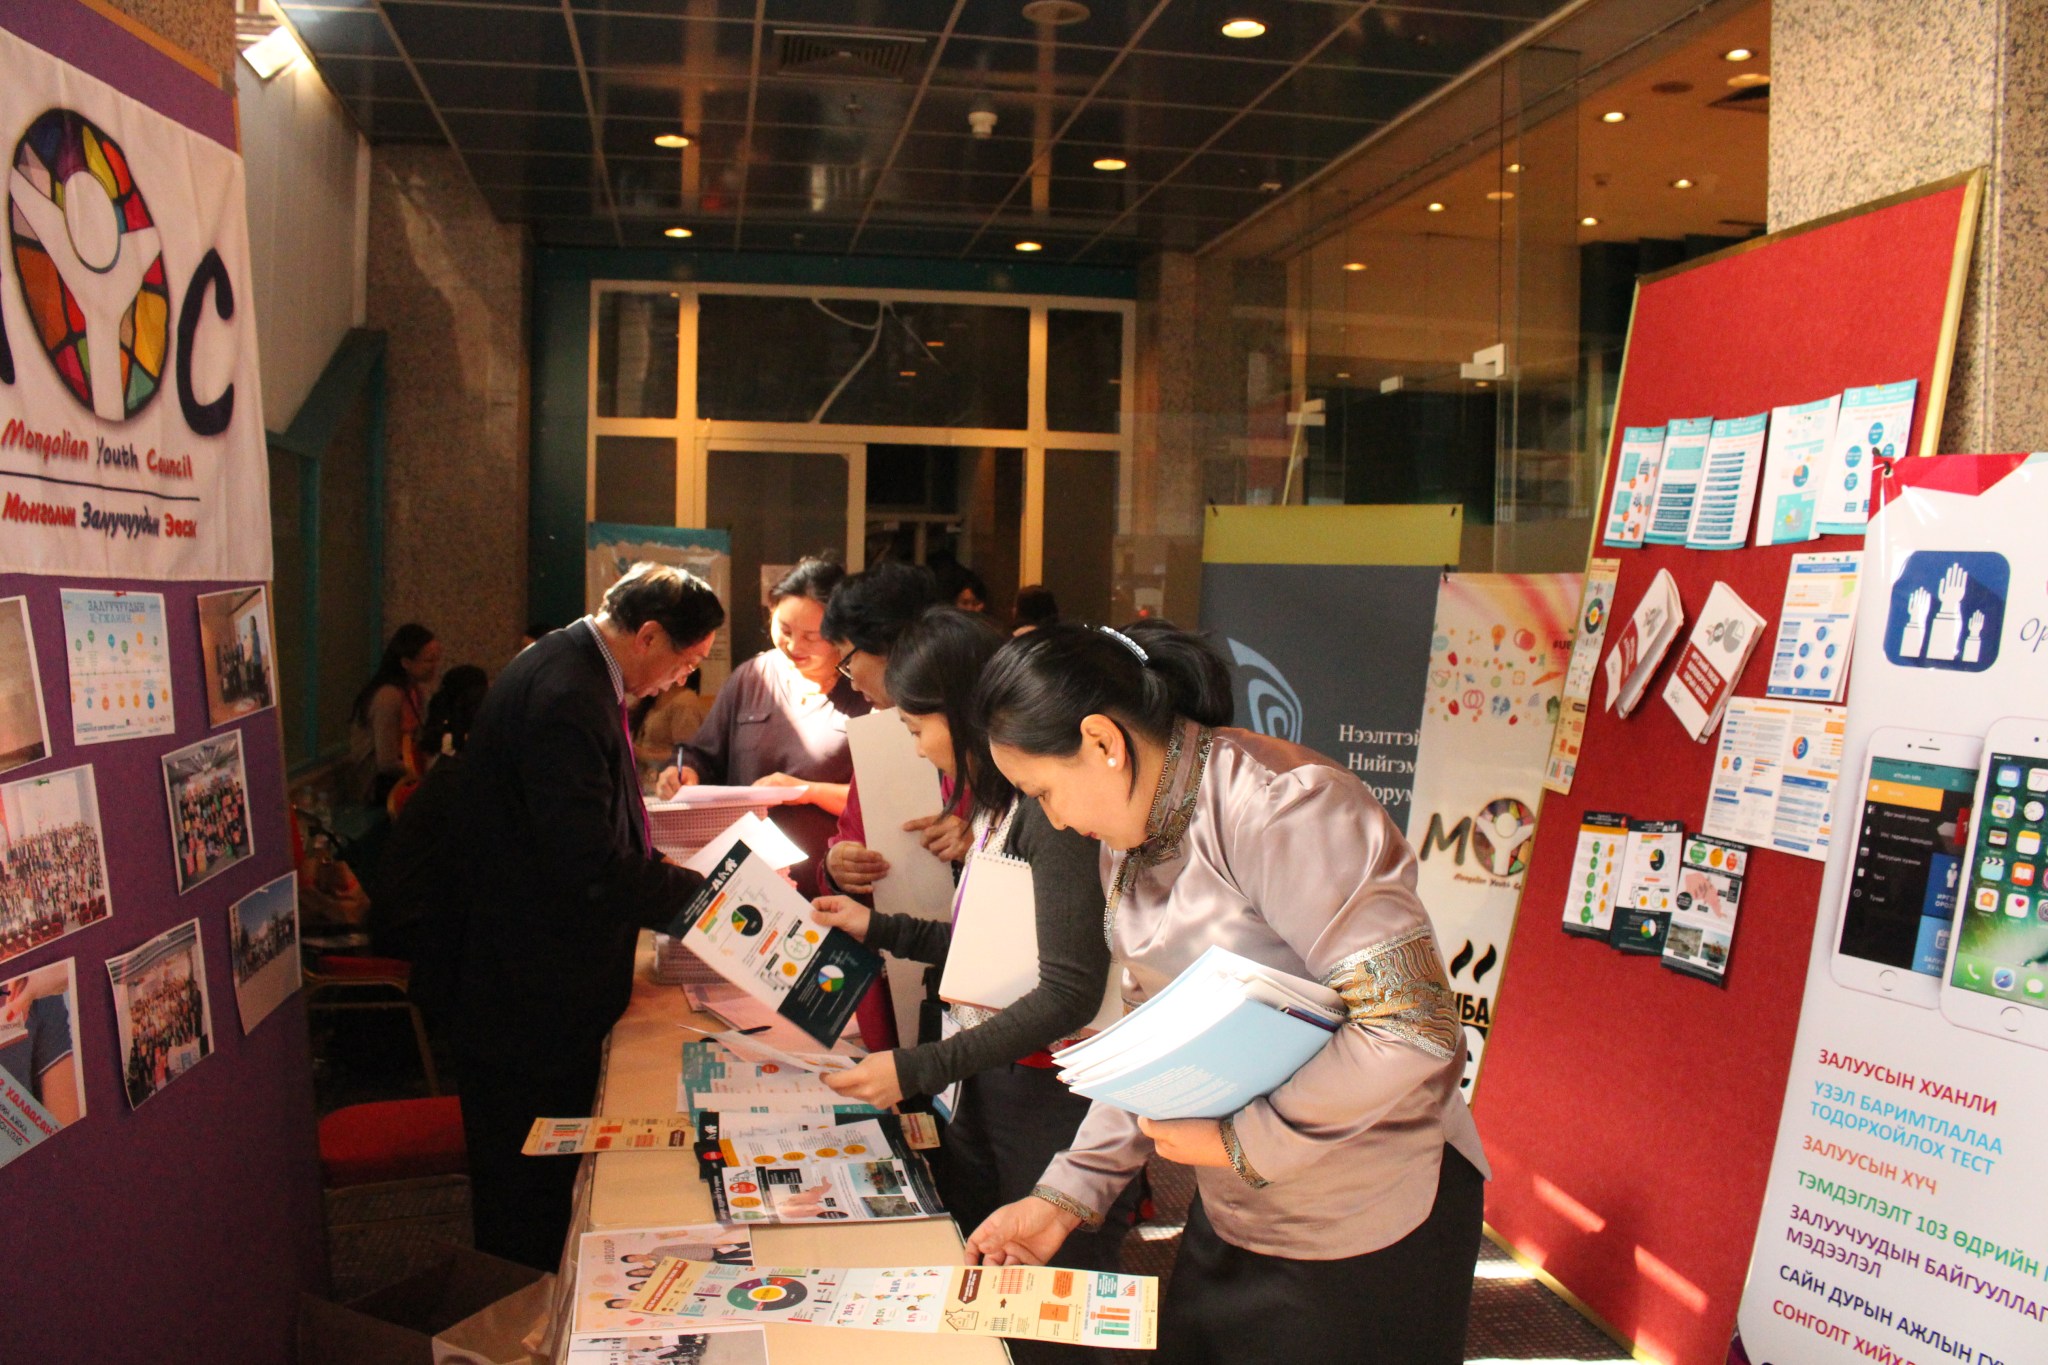 NGOs promoting their activities and exchanging information about local initiatives